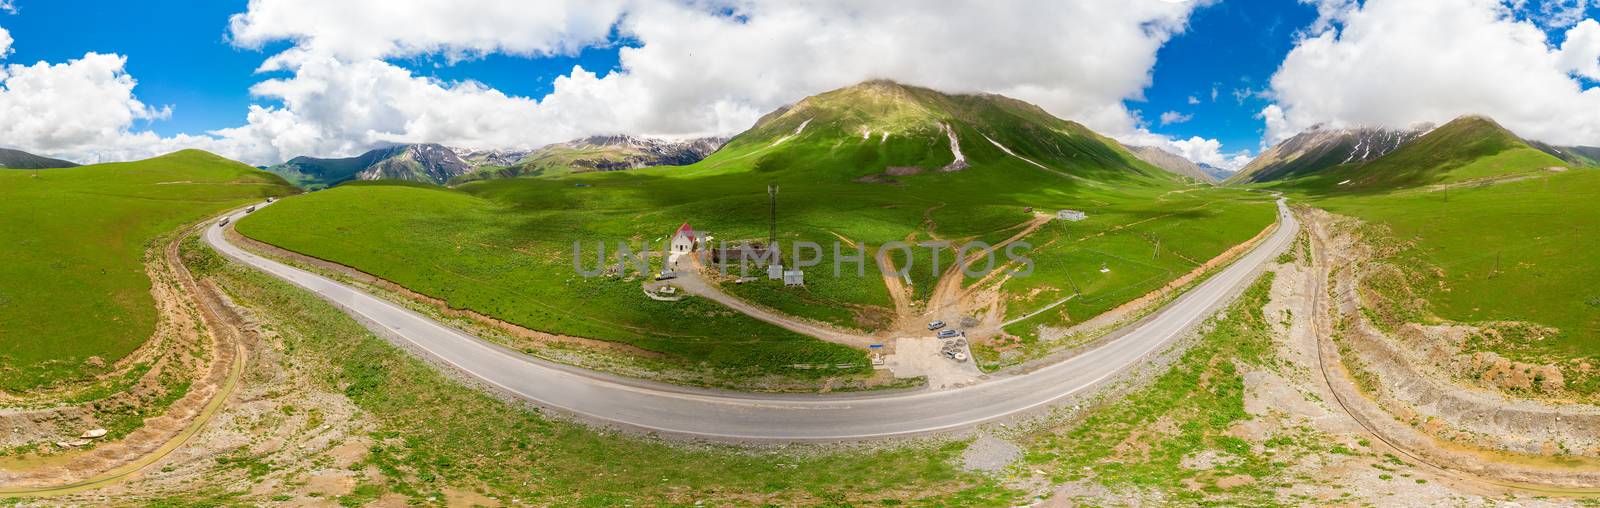 winding Georgian Military Road surrounded by mountains landscape by kosmsos111